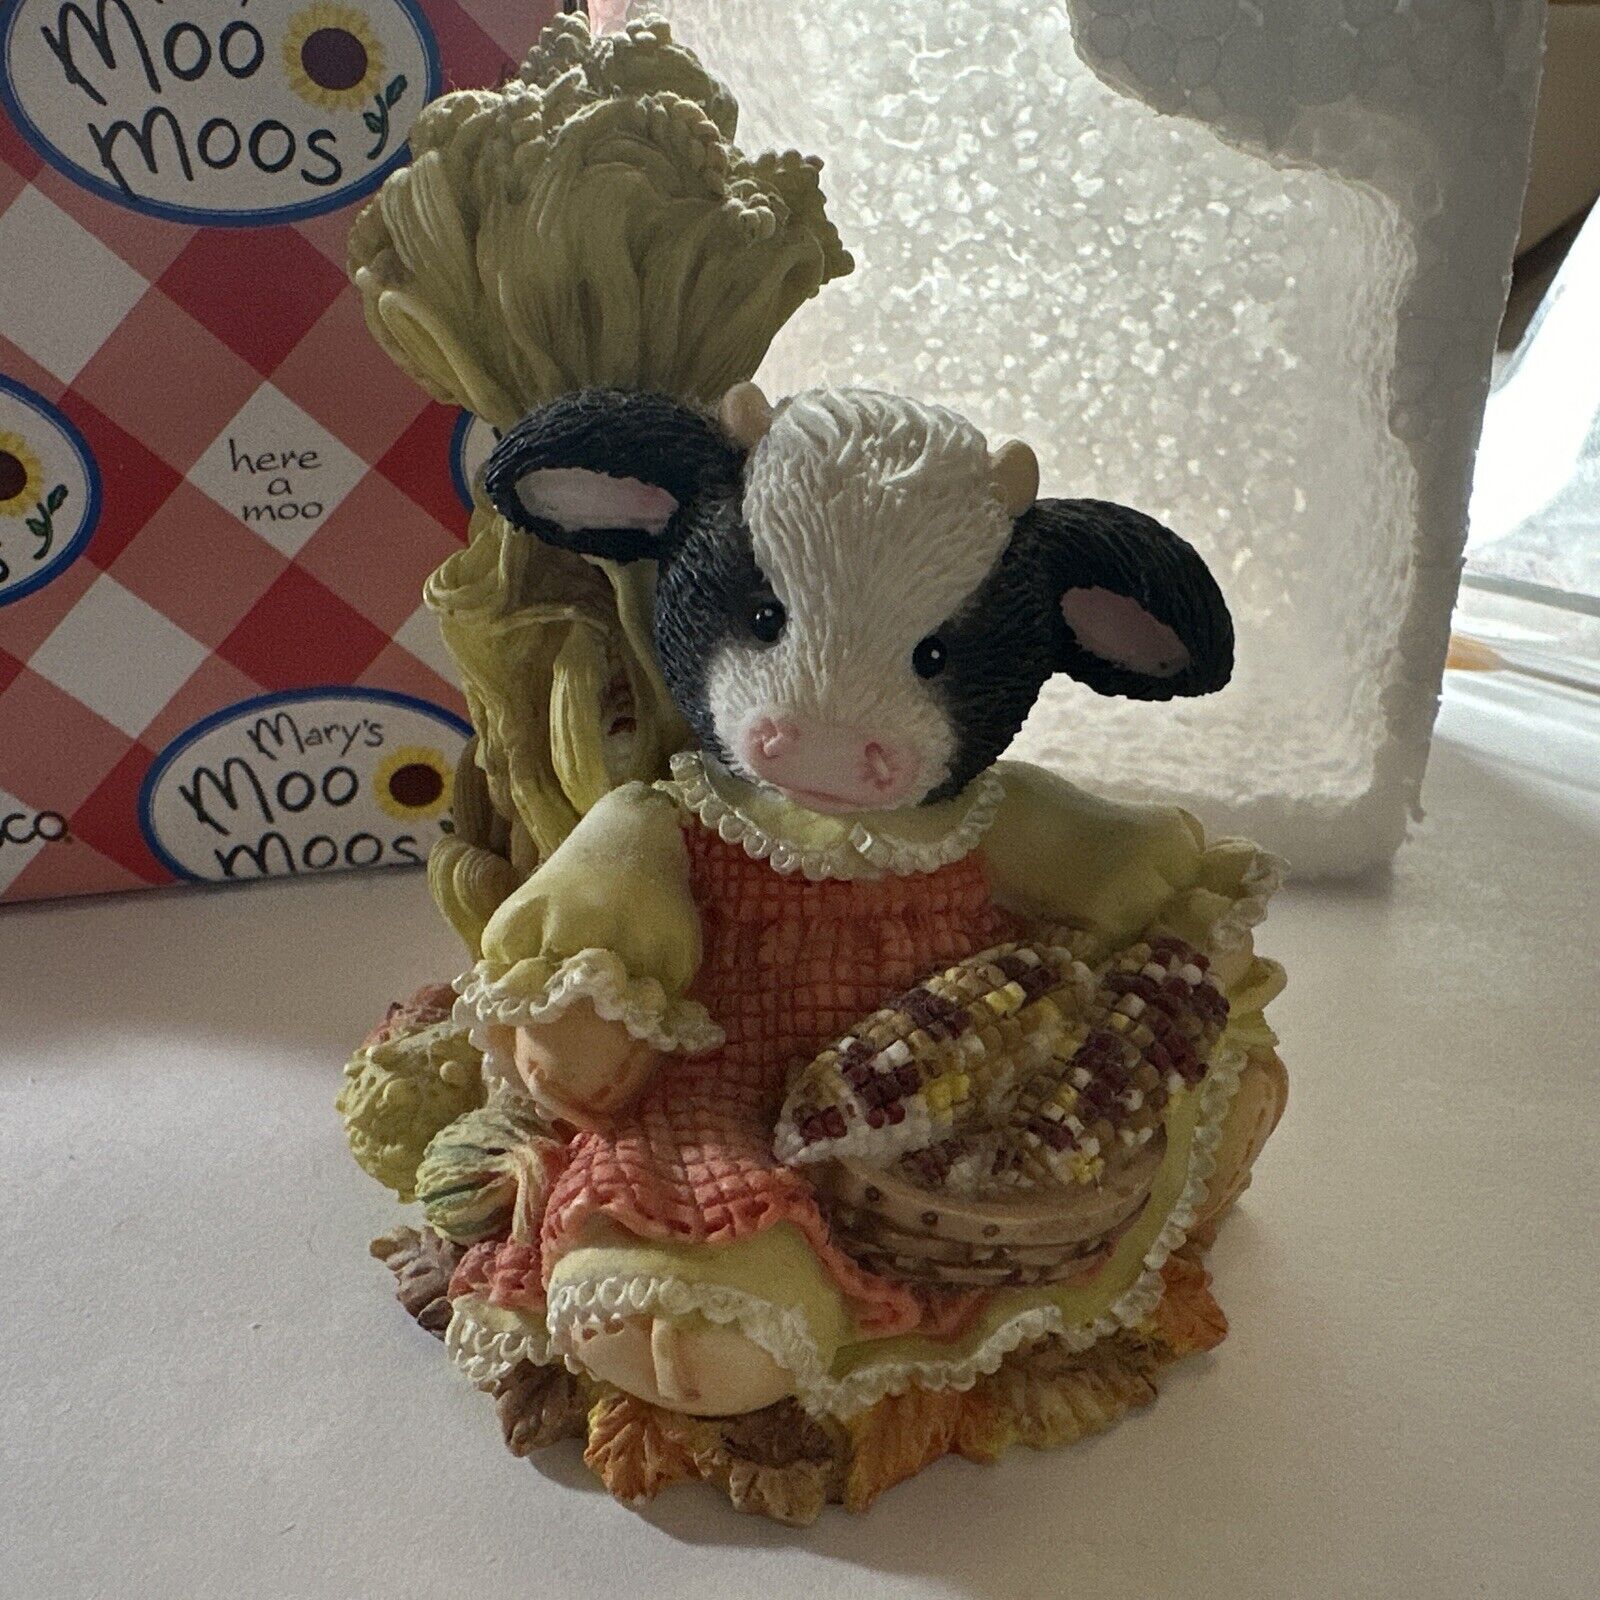 Mary’s Moo Moos “The Cows In the Corn” 1995 Enesco Cow Figure In Box